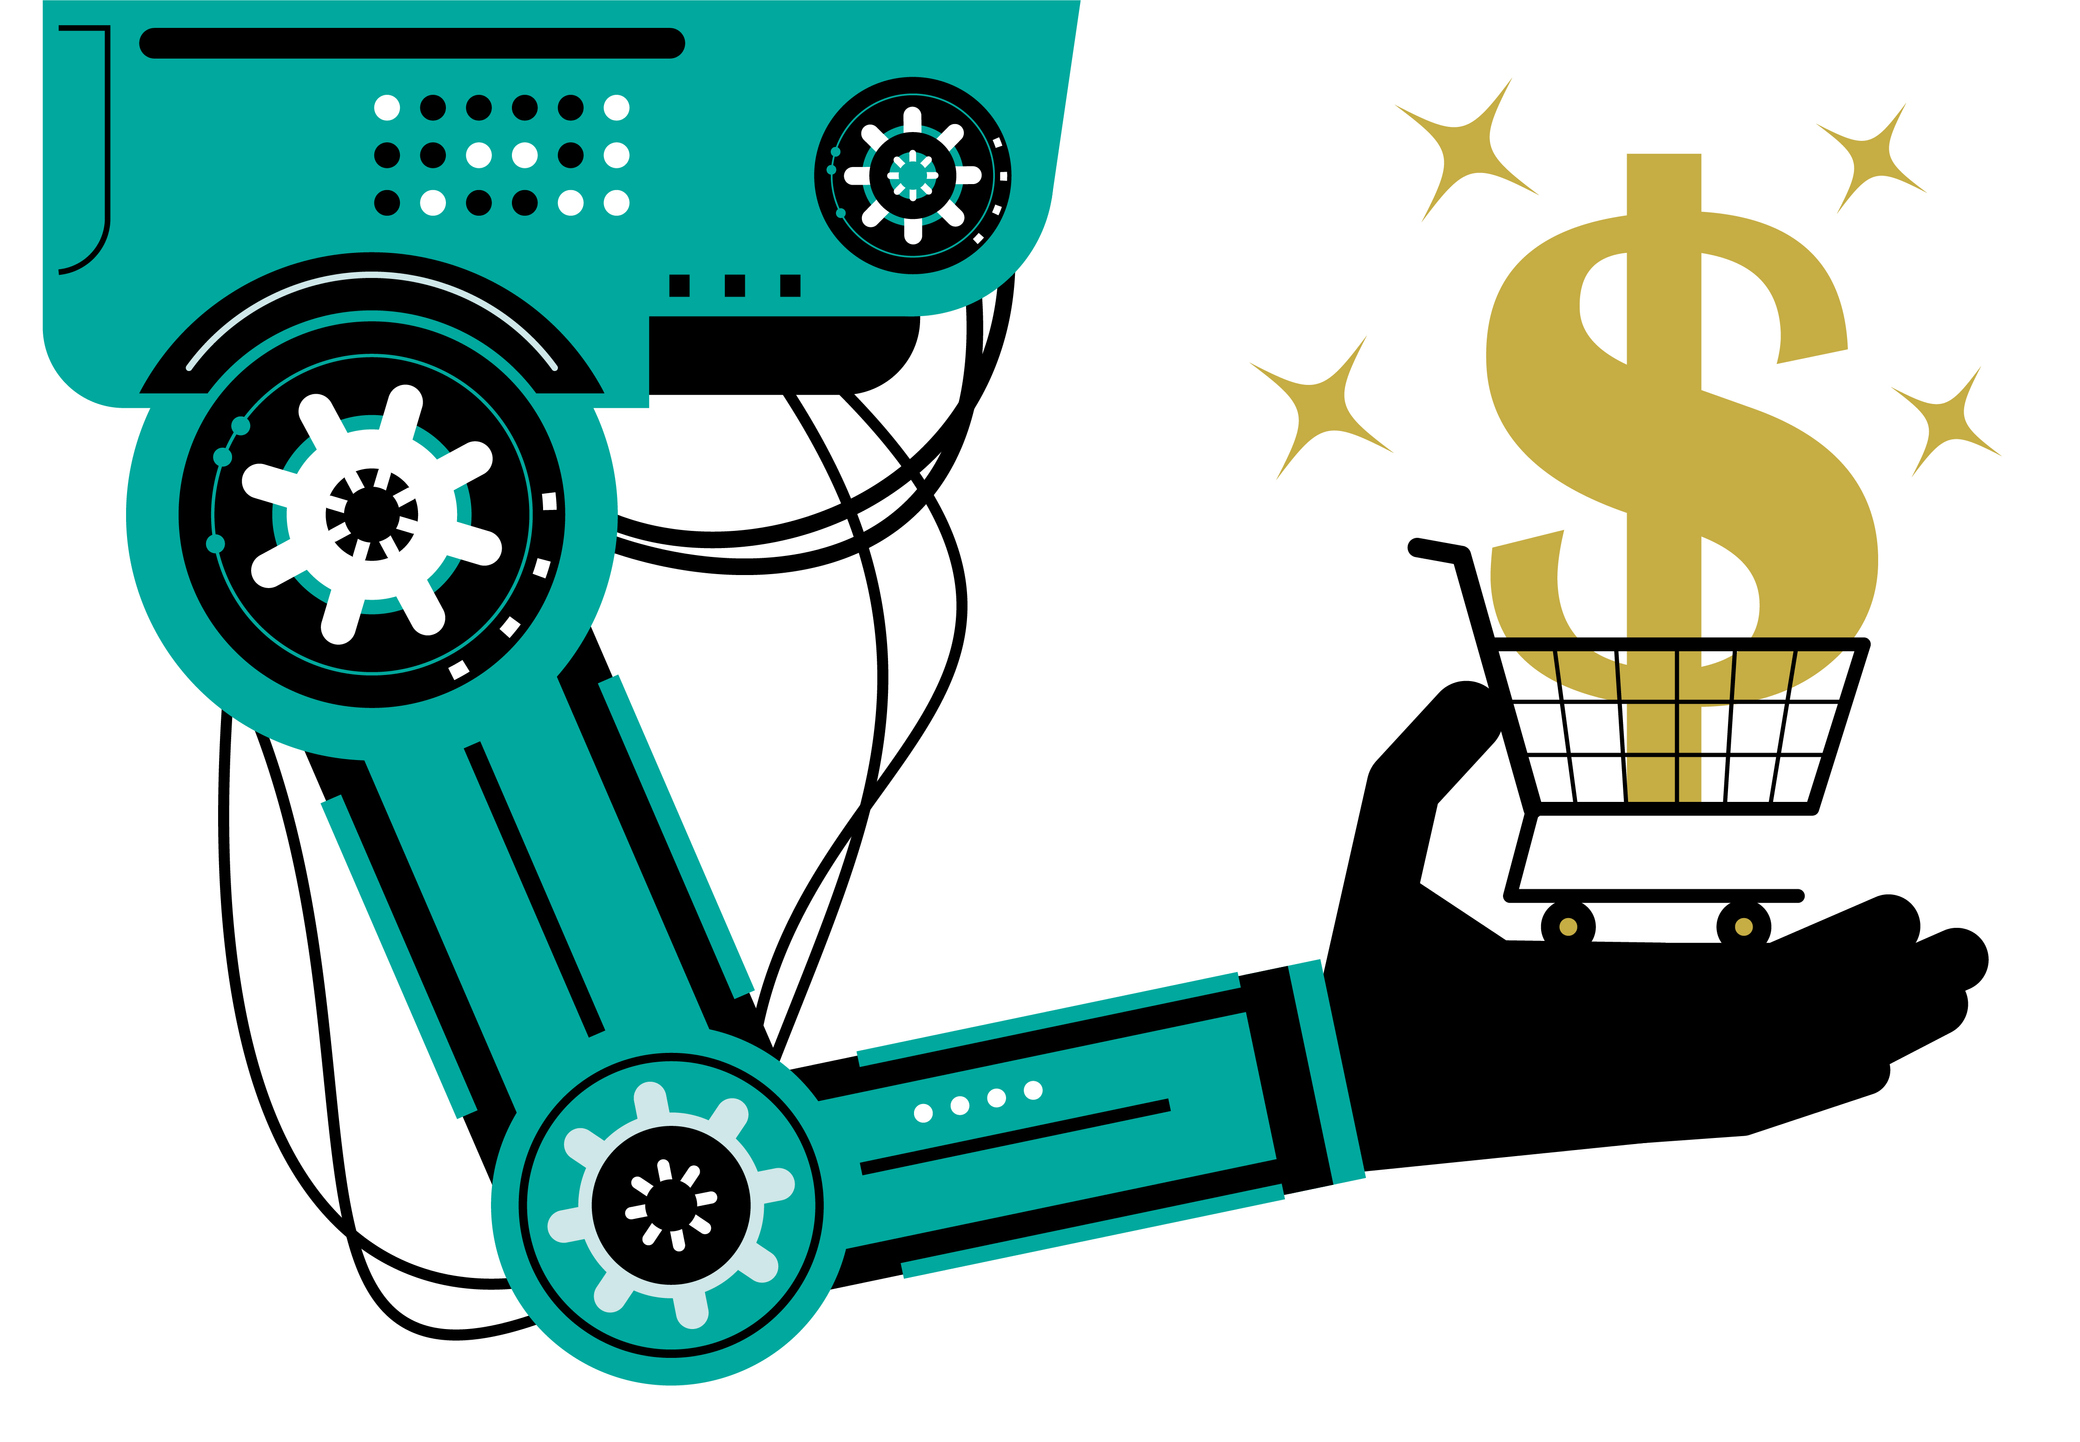 A sales automation robot arm holding a shopping cart with a dollar sign inside